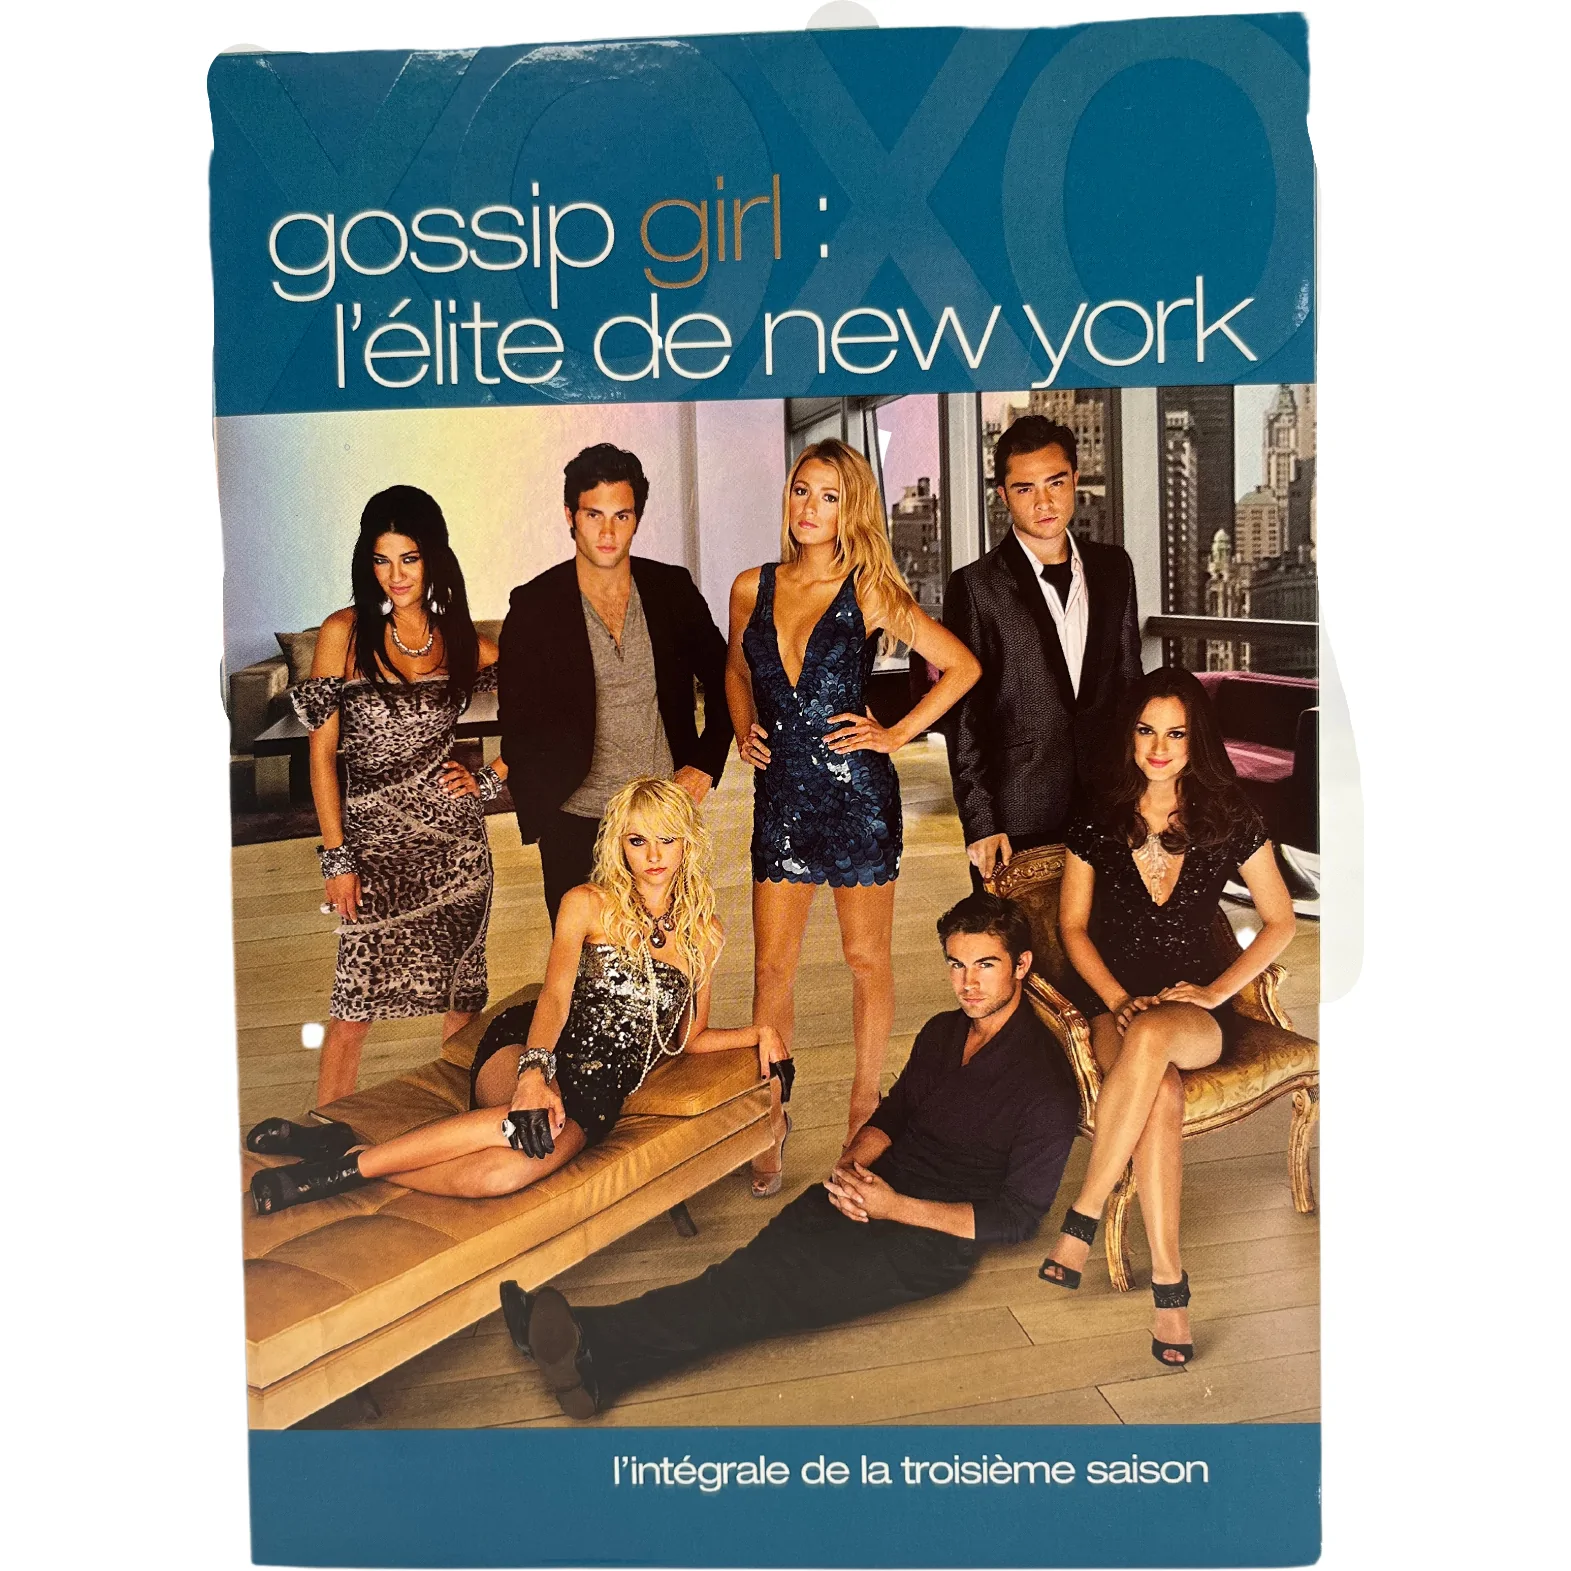 https://www.canadawideliquidations.com/wp-content/uploads/2022/06/products-GossipGirl_47bbaace-76d1-4aac-801e-5b30057bfb23.png